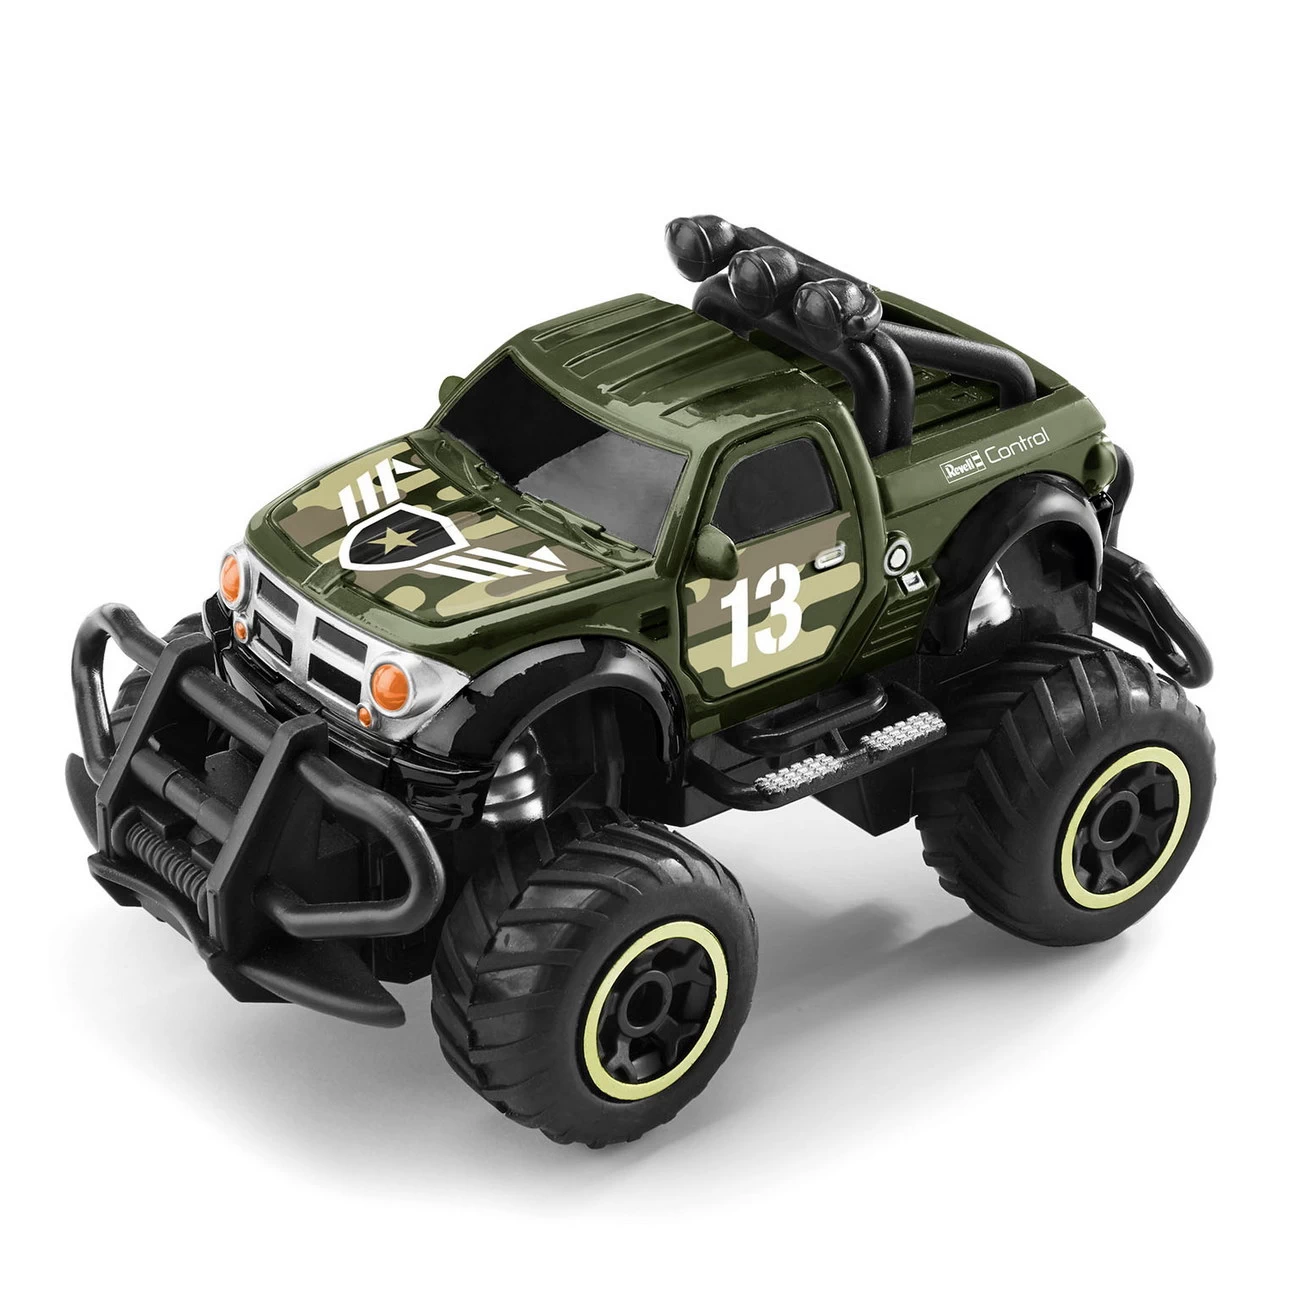 Revell Control 23491 - RC SUV Field Hunter 27 MHz